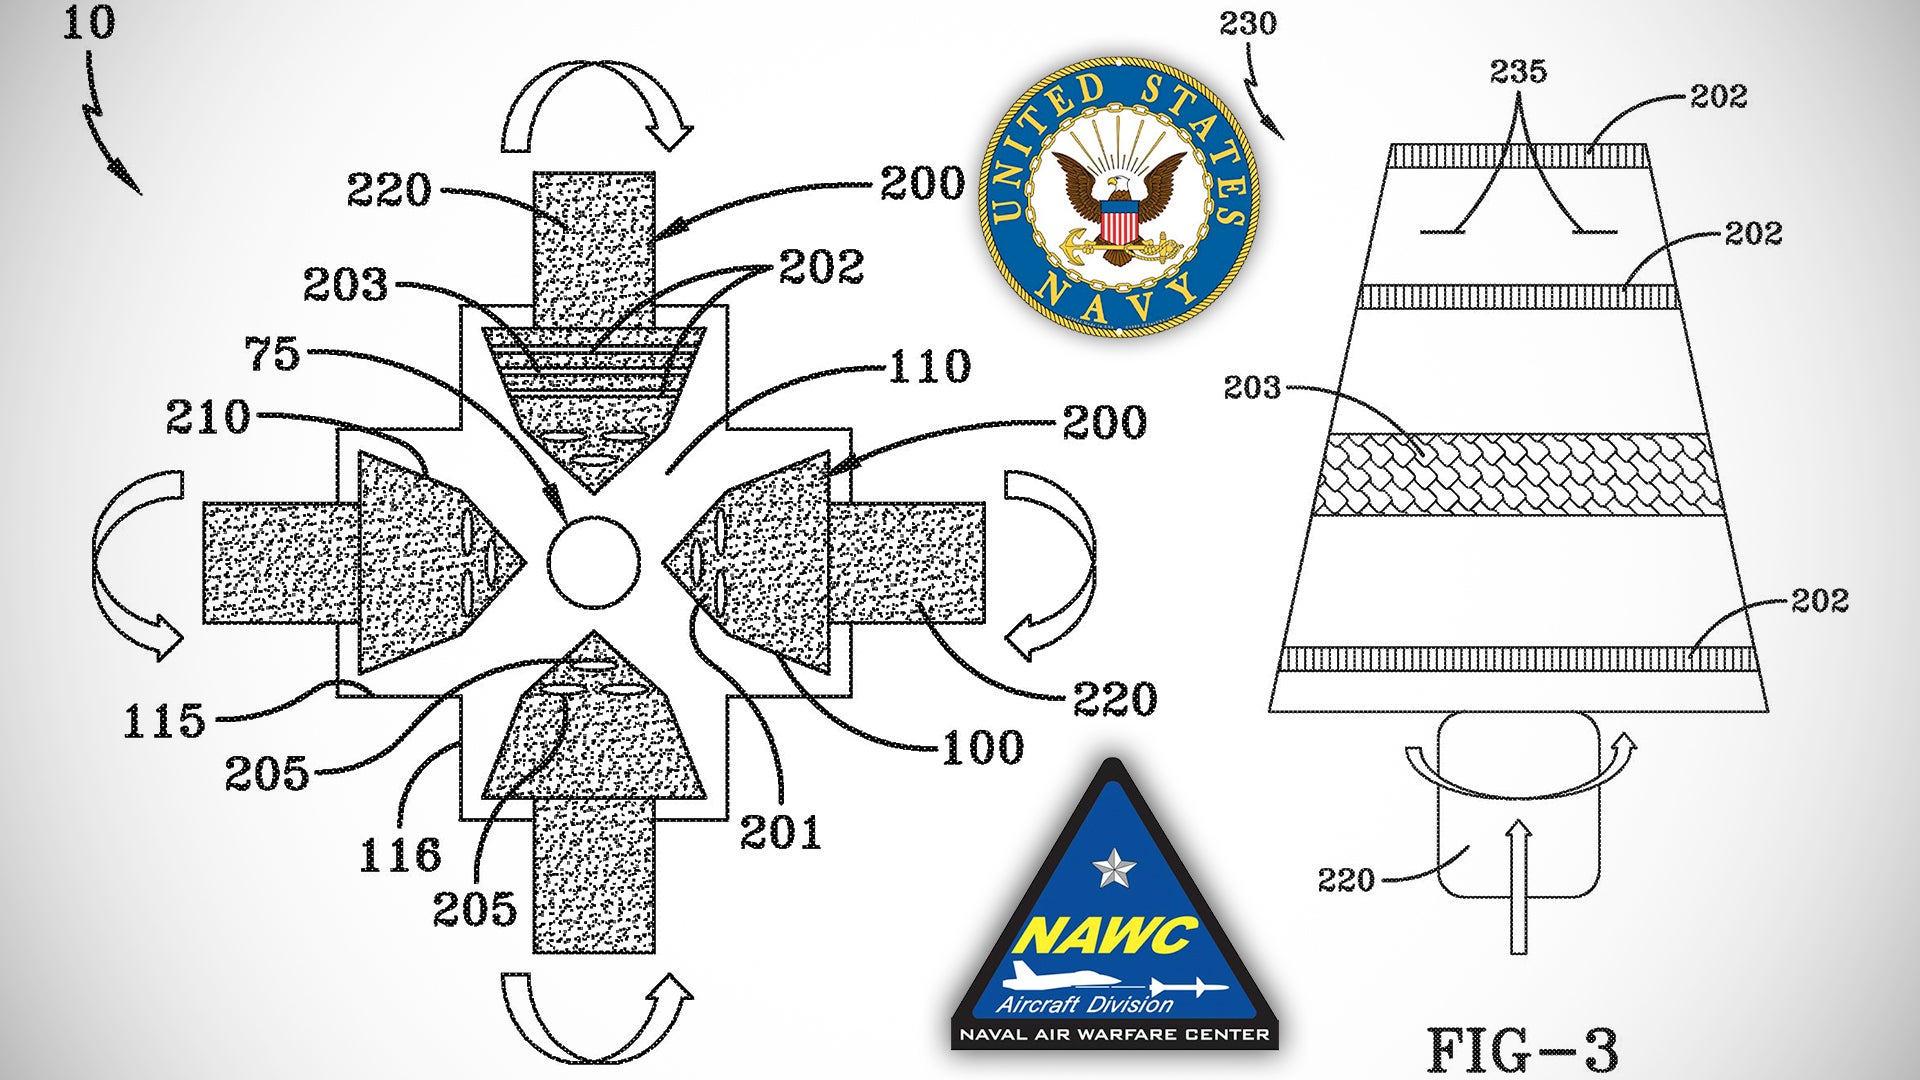 Scientist Behind The Navy's "UFO Patents" Has Now Filed One For A Compact Fusion Reactor